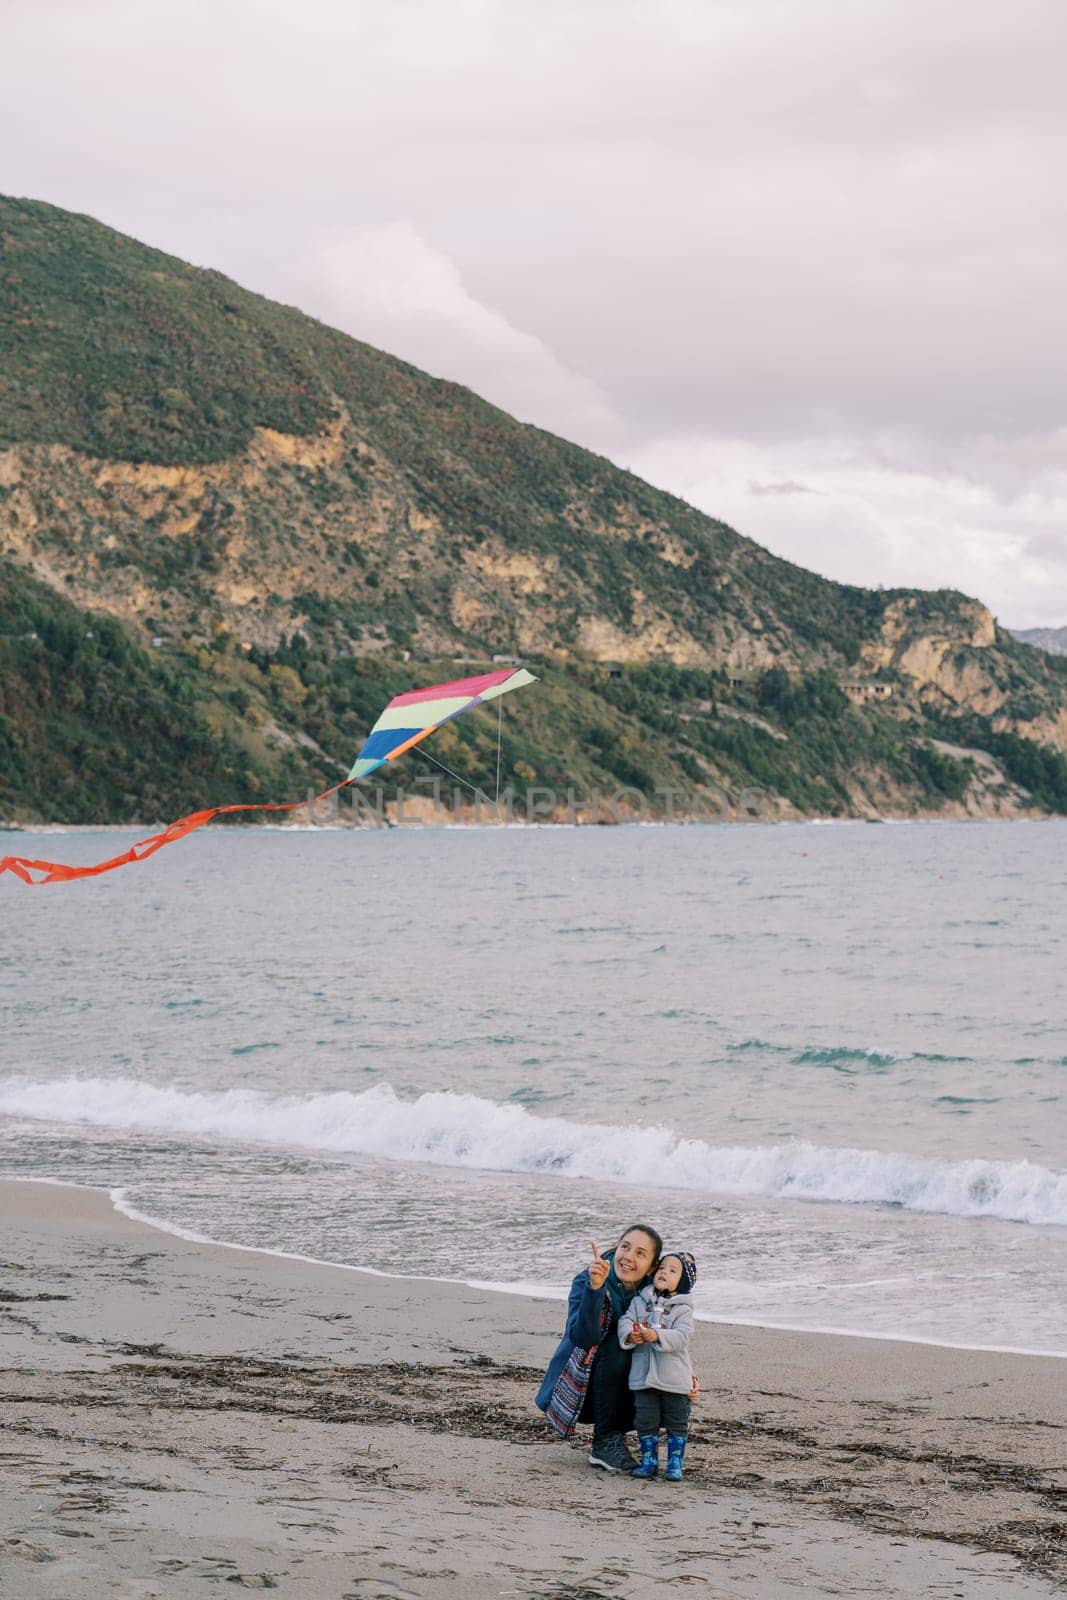 Mom sat down near her little daughter, showing her a kite hovering above. High quality photo